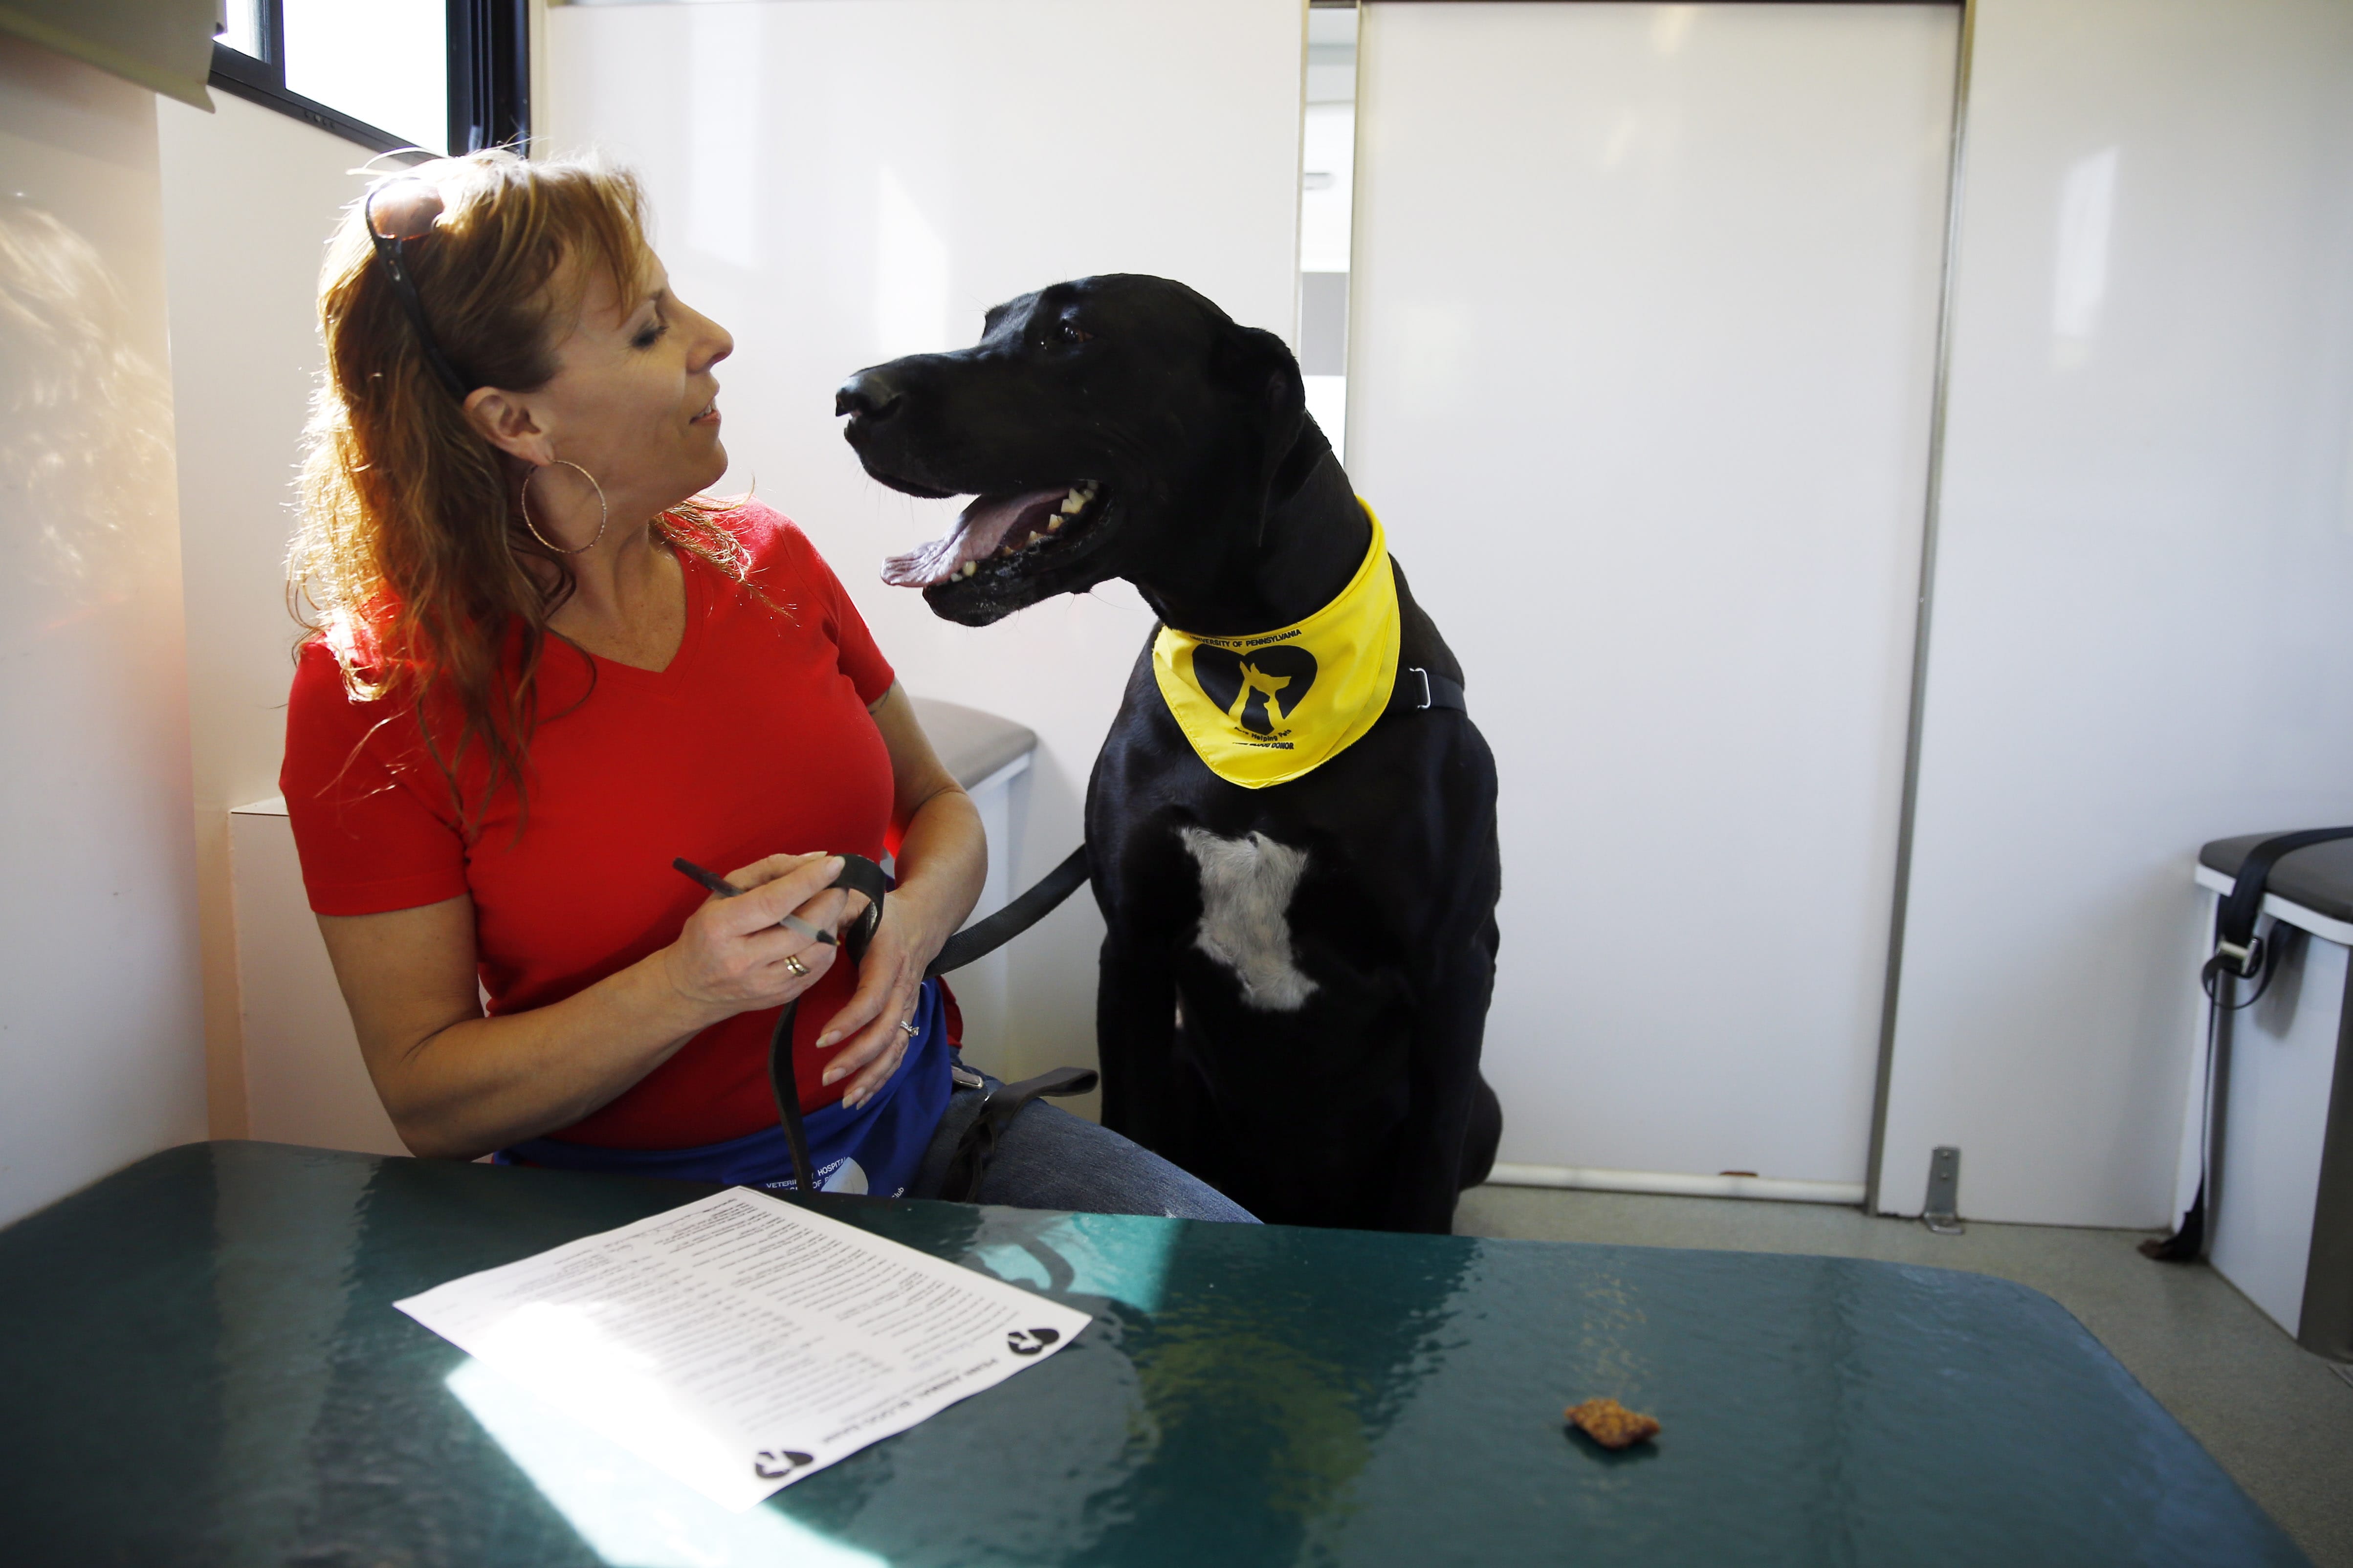 Paula Hackett, of Harleysville, Pa., talks with her dog Tosey, a 5-year-old great Dane, inside the University of Pennsylvania veterinary school's animal bloodmobile in Harleysville, Pa.